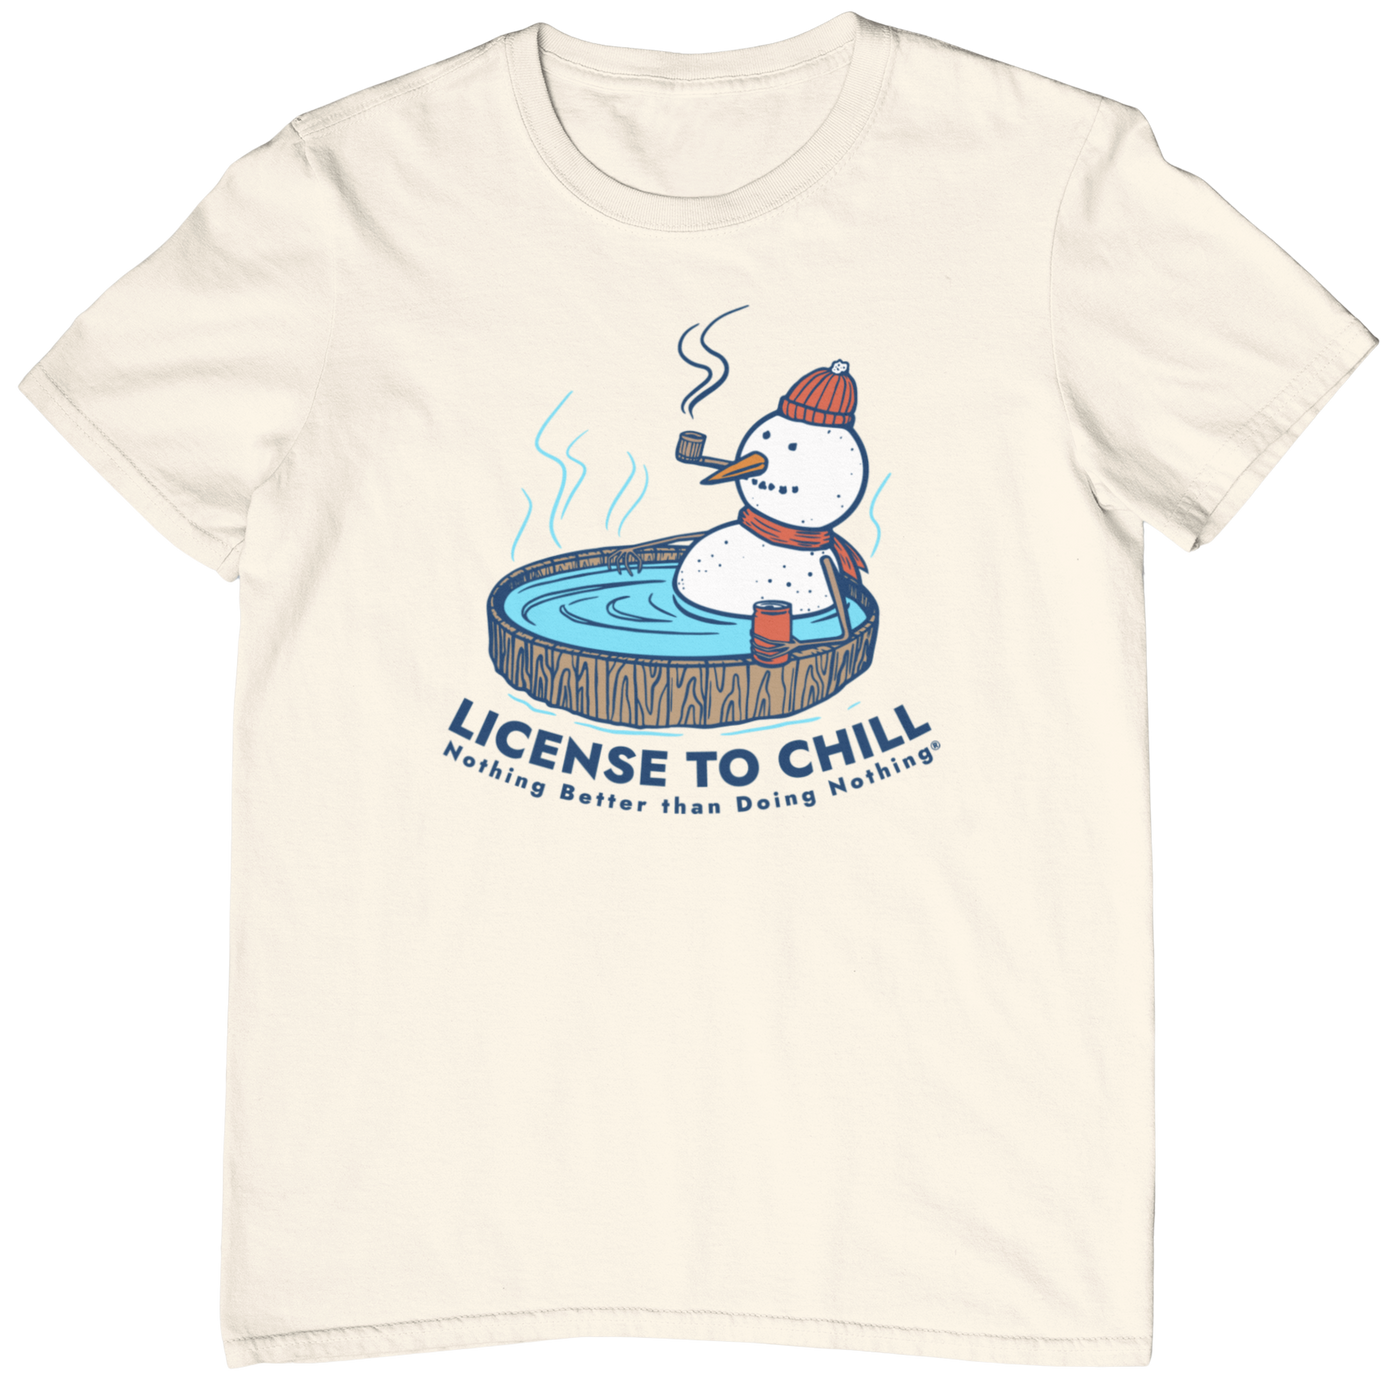 License to Chill Tee